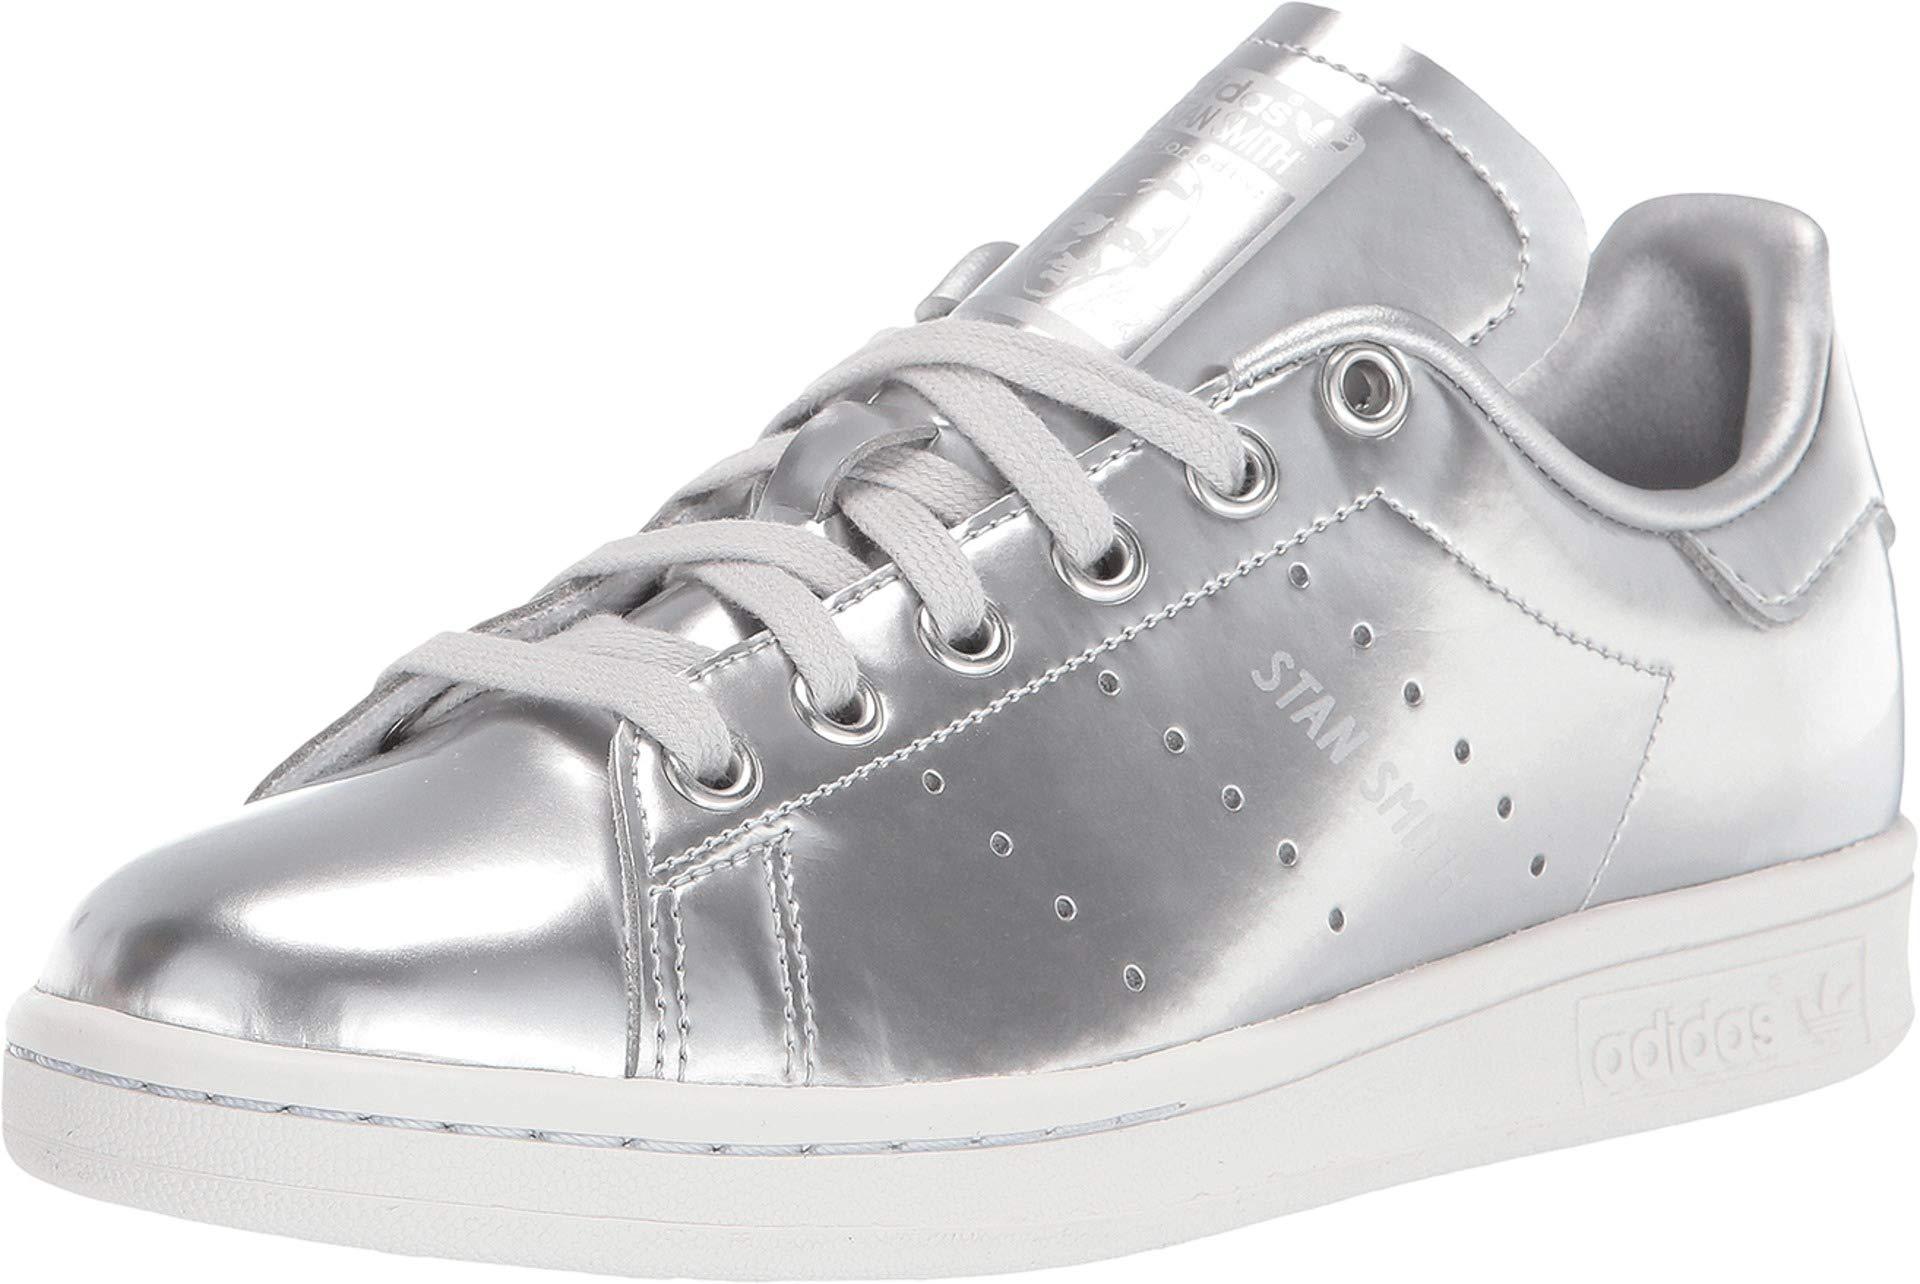 adidas Originals Leather Stan Smith in Silver (Metallic) - Save 64% - Lyst